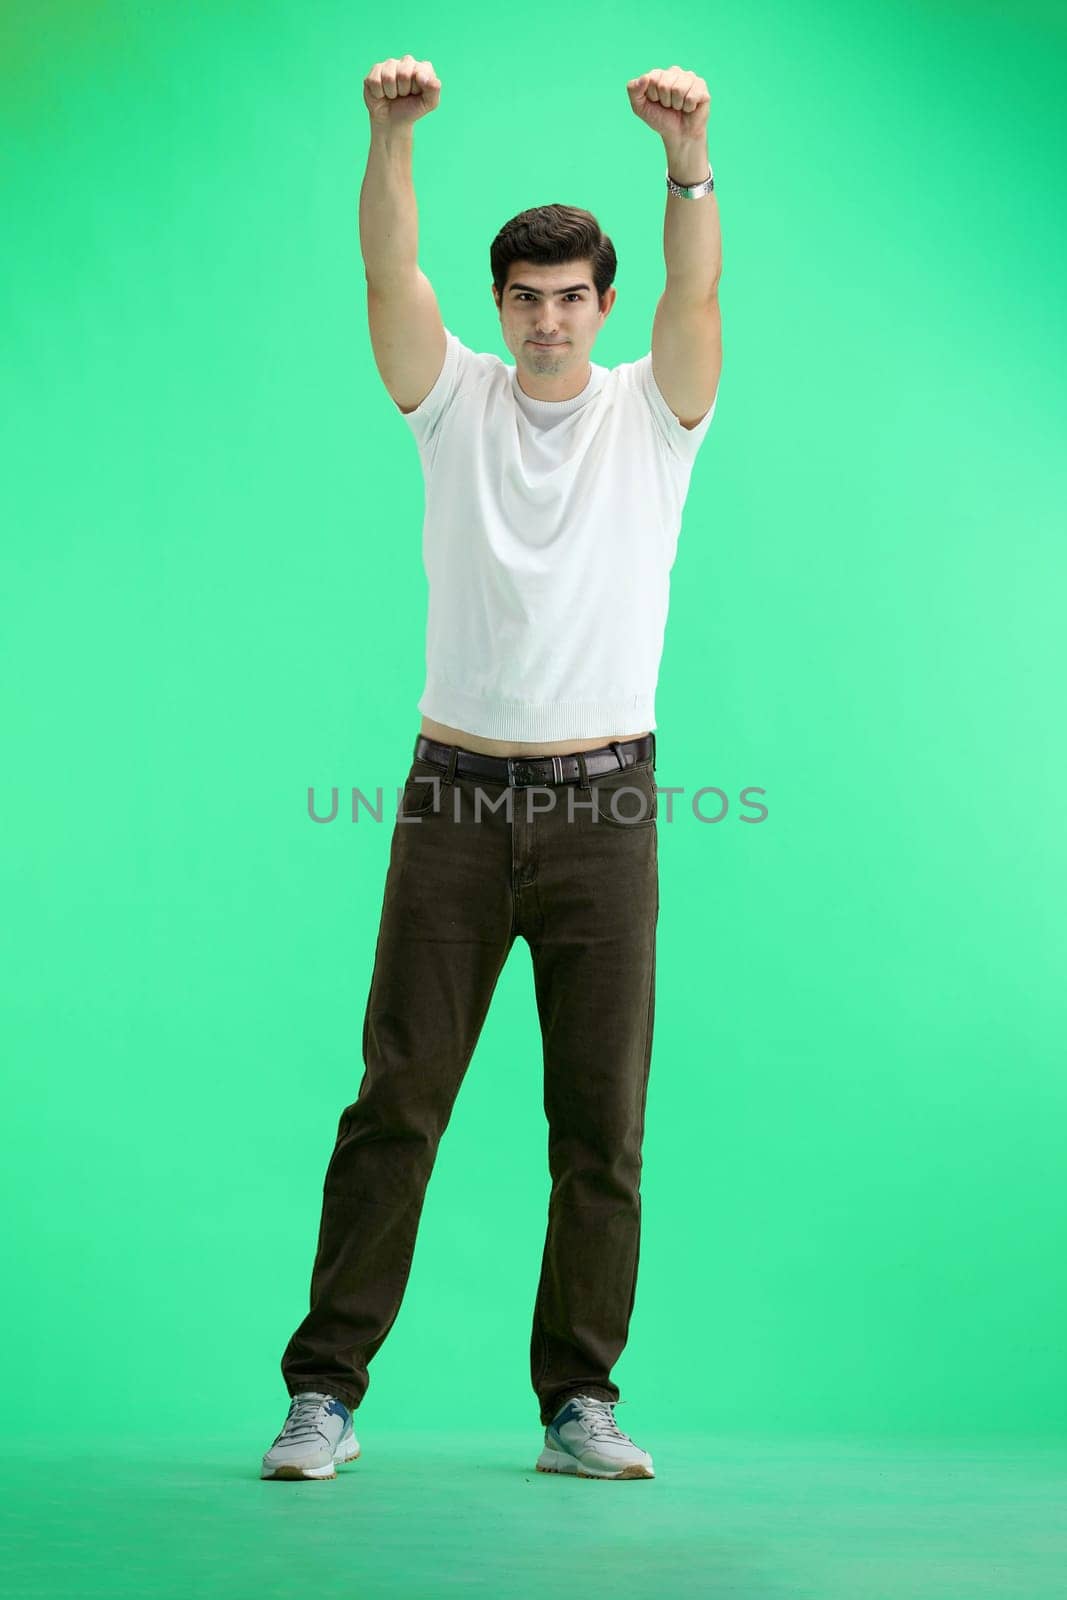 A man in full height, on a green background, raised his hands up.